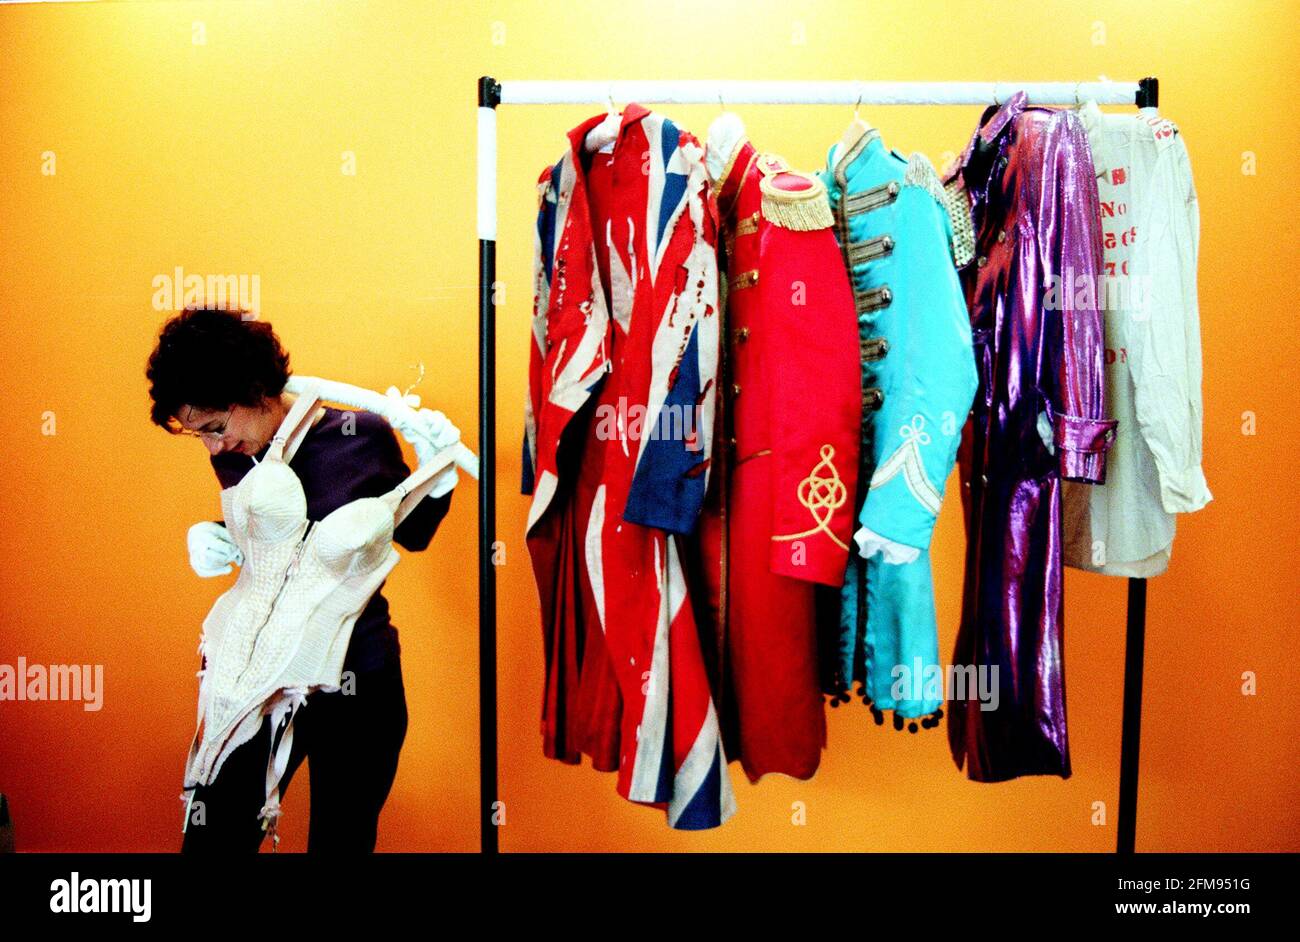 EXHIBITION OF ROCK AND ROLL COSTUMES AT THE BARBICAN.LISA COLLINS OF THE BARBICAN TRIES MADONNA'S JEAN-PAUL GAULTIER BUSTIER. BEHIND HER ON THE RACK IS L-R: DAVID BOWIE'S UNION JACK FROCK COAT; GEORGE HARRISONS RED COAT FROM SGT. PEPPER; PAUL MCCARTNEY'S BLUE COAT FROM SGT. PEPPER; AND PRINCE'S PURPLE ROBE. Stock Photo